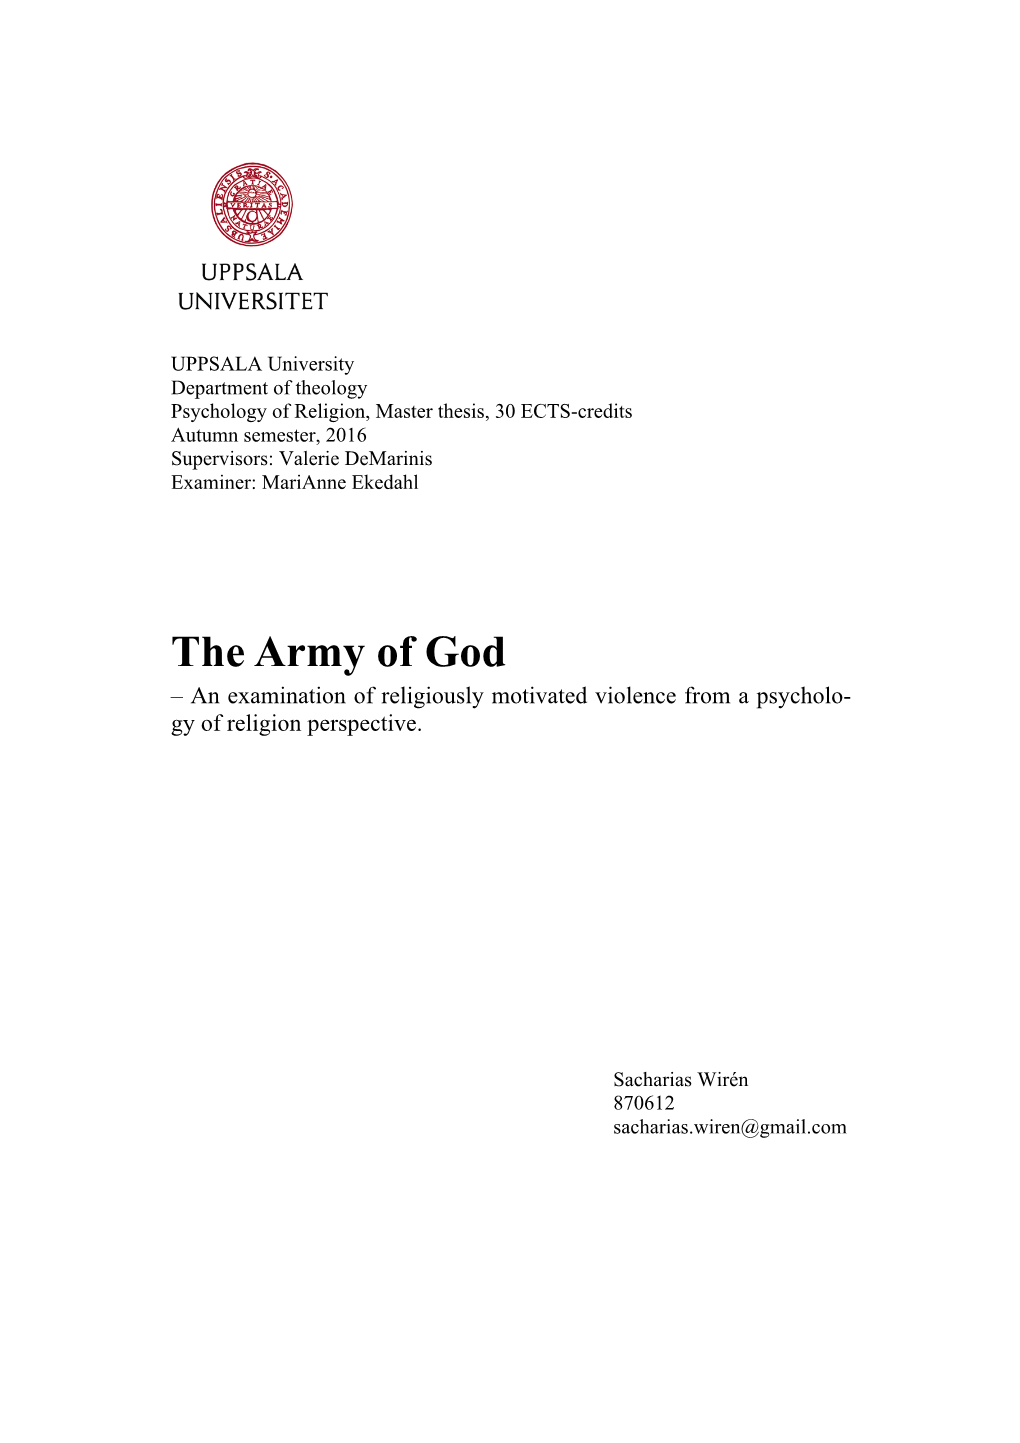 The Army of God – an Examination of Religiously Motivated Violence from a Psycholo- Gy of Religion Perspective